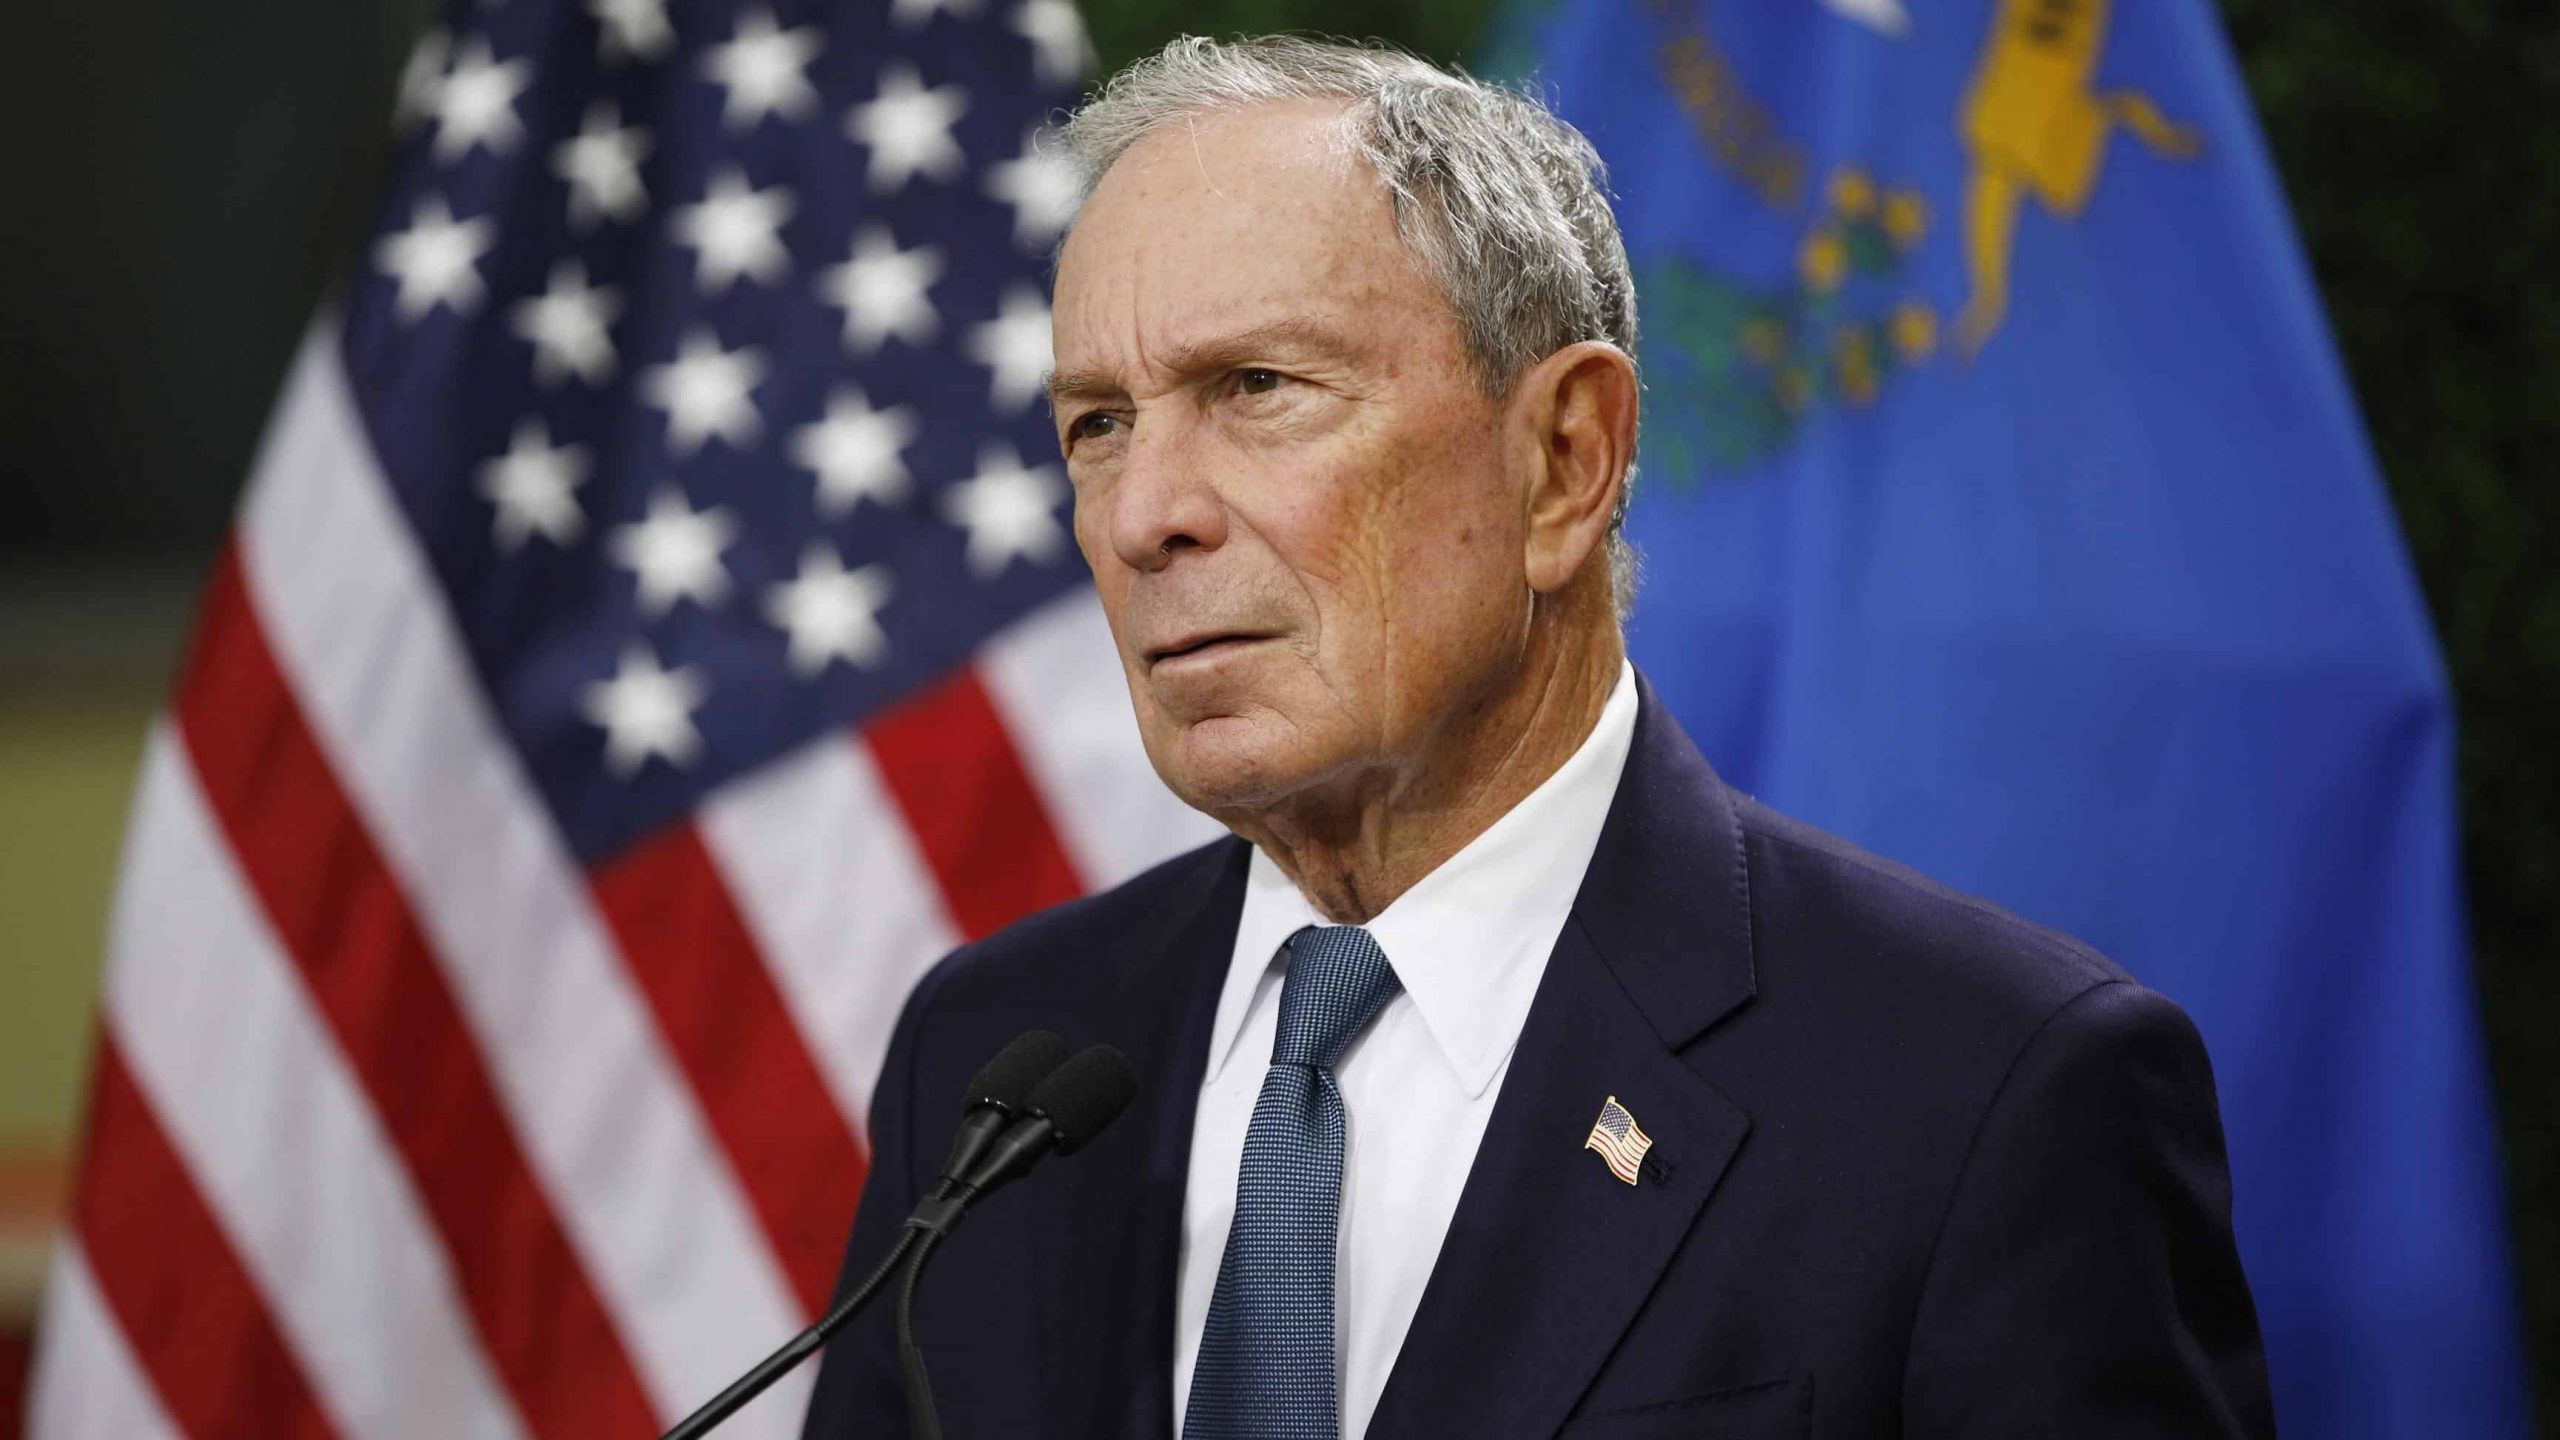 The battle of the billionaires: Michael Bloomberg launches US presidential bid